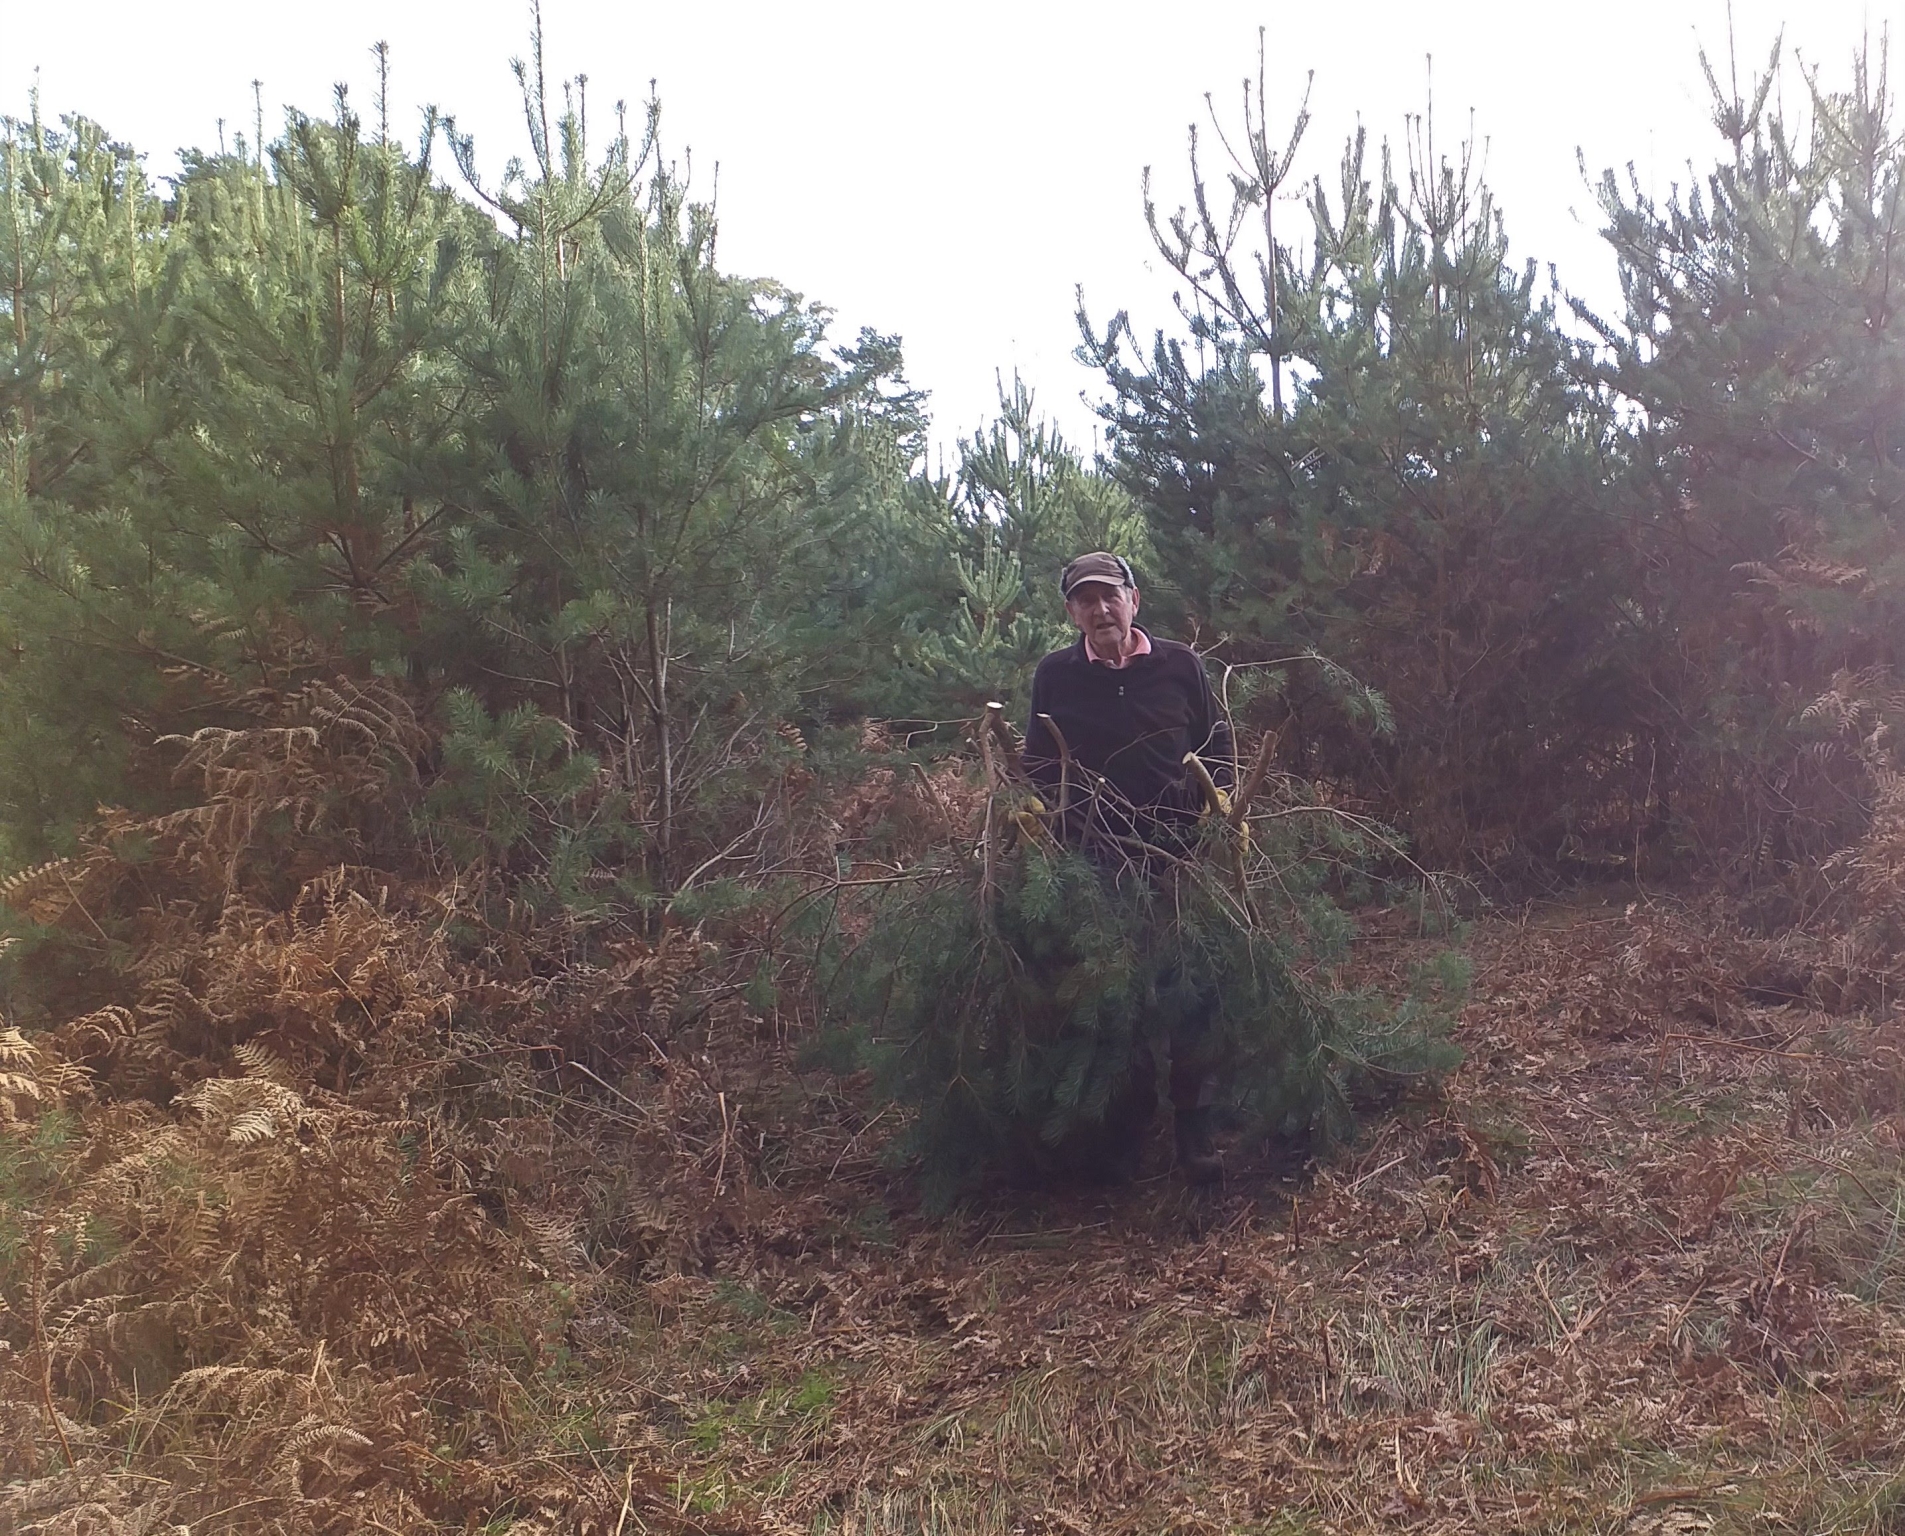 A photo from the FoTF Conservation Event - December 2019 - Self Seeded Pine Tree Removal on the Goshawk Trail : A volunteers drags a removed pine tree away